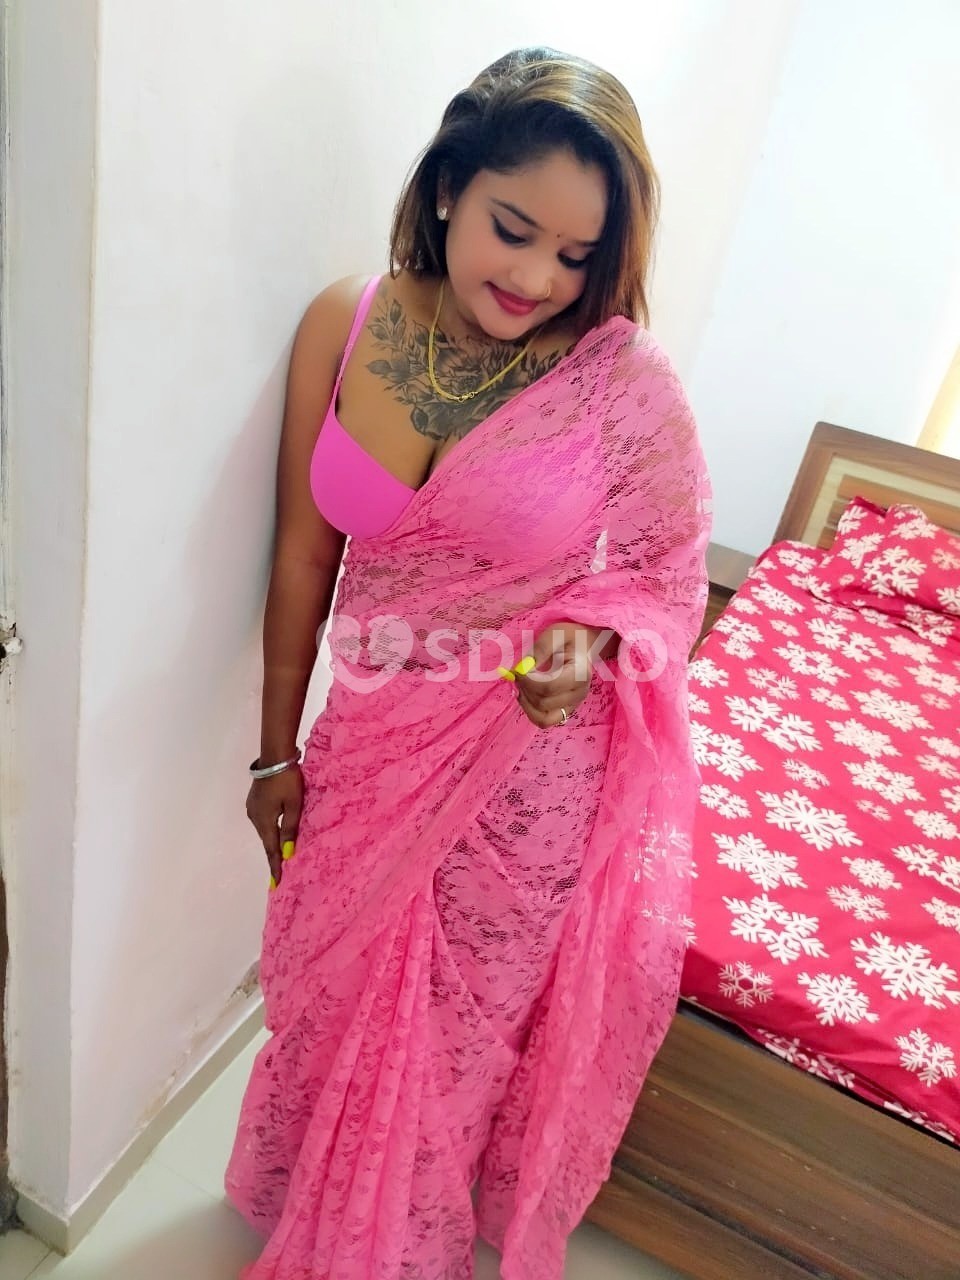 Btm layout AMISHA) (V I P) LOW RATE DIRECT ESCORT FULL SAFE AND SECURE 24 HORSE AVAILABLE BHABHI AND COLLEGE GIRL AUNTY 